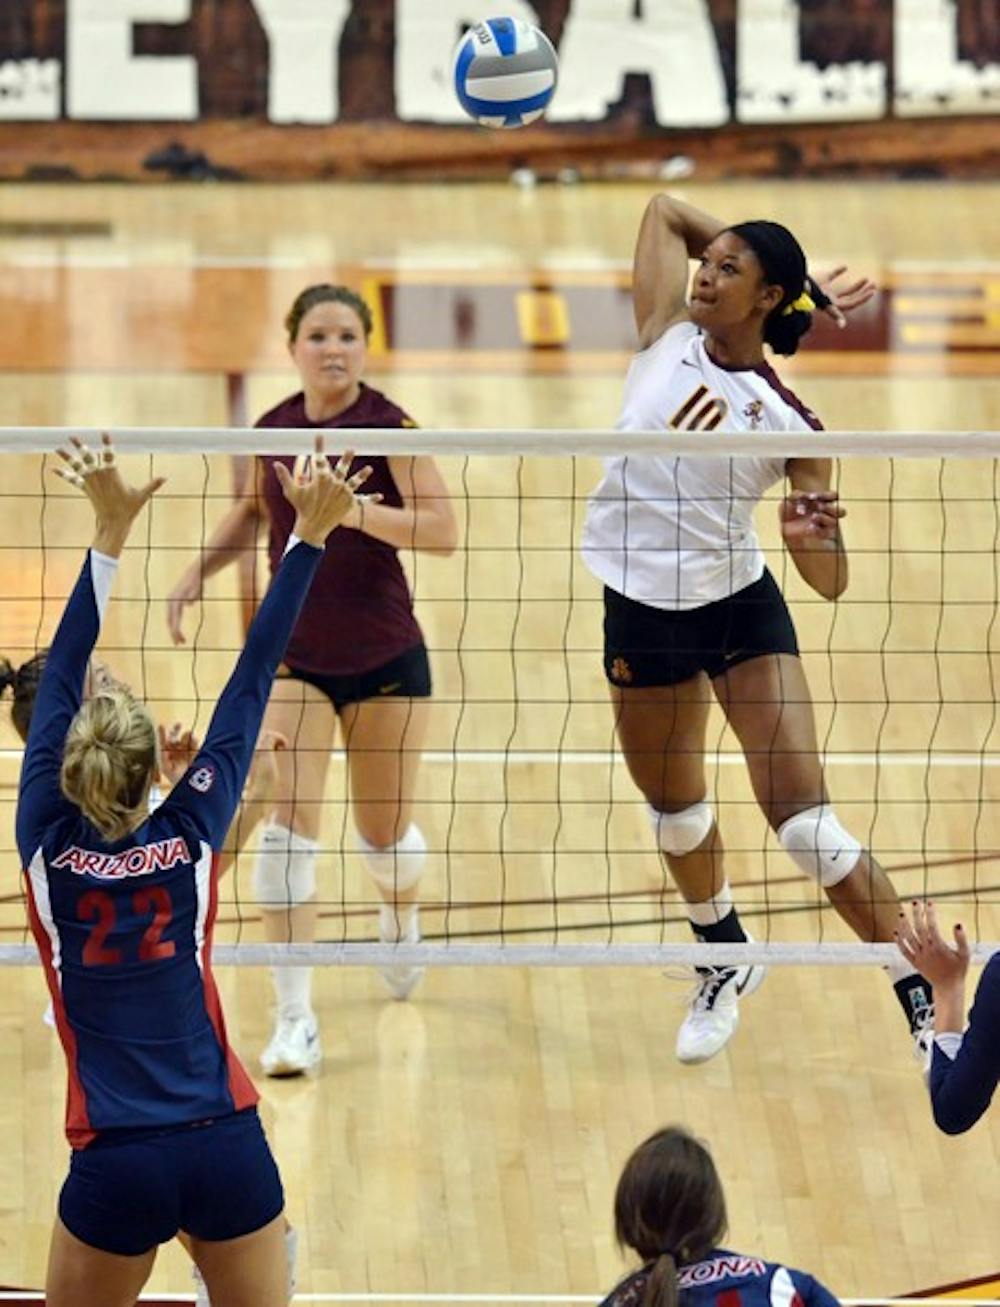 TOUGH START: ASU junior middle blocker Erica Wilson spikes the ball during a match against UA last season. The Sun Devils opened up Pac-12 play with a pair of loss against Oregon and Oregon State over the weekend. (Photo by Aaron Lavinsky)